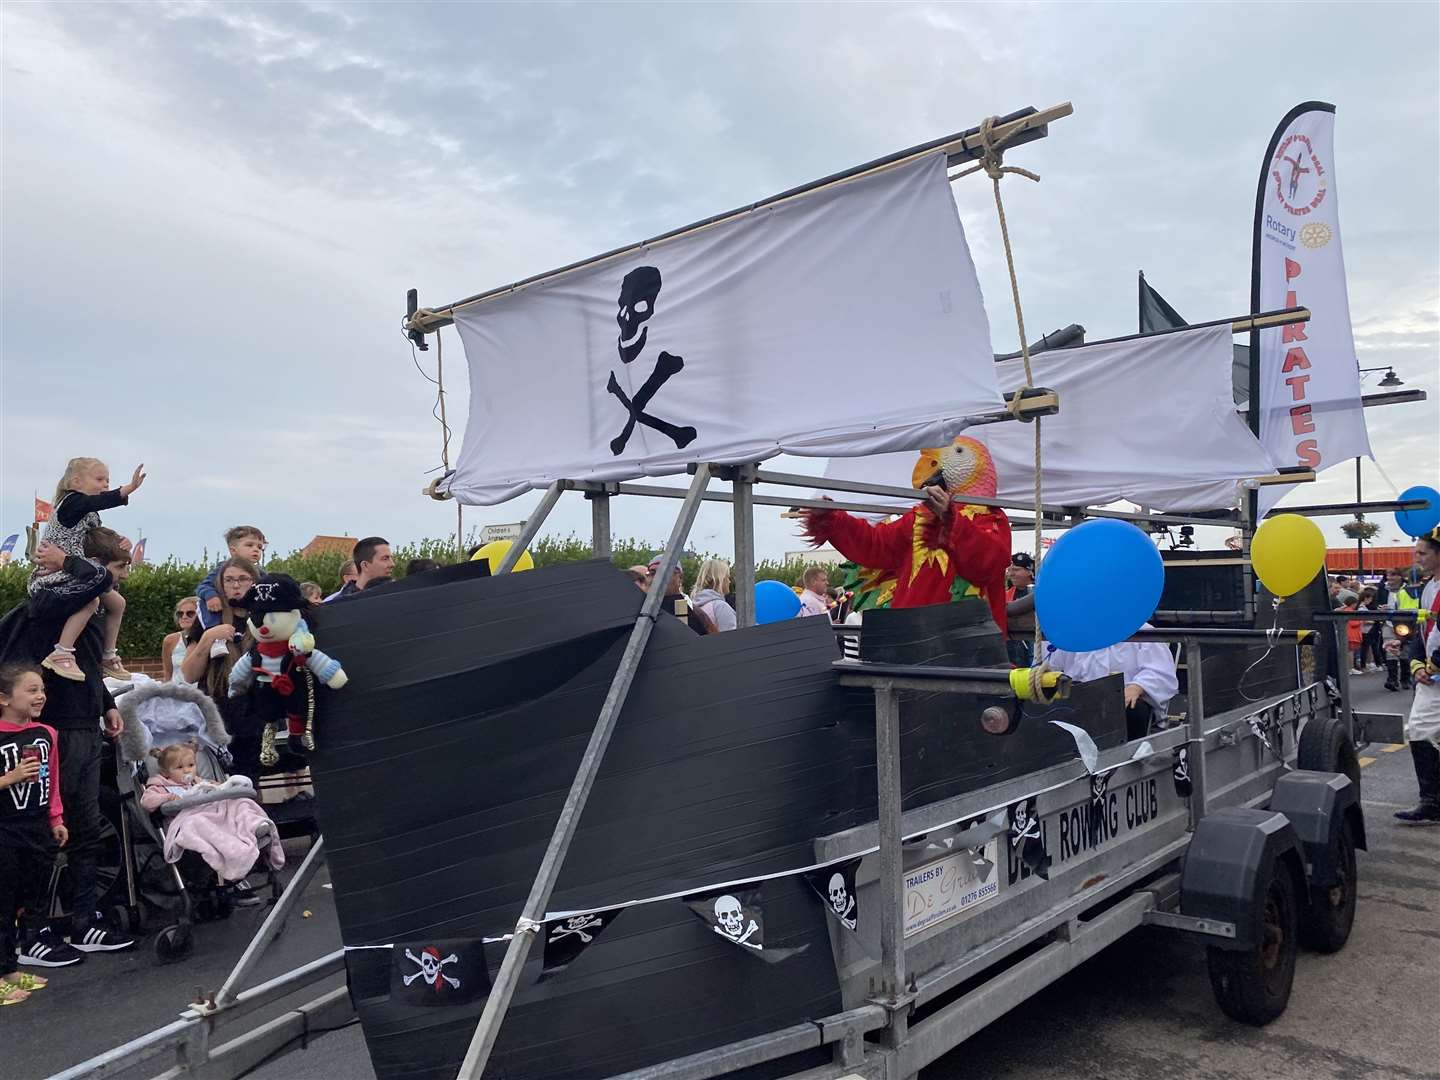 A huge parrot donned Rotary Pirates' float